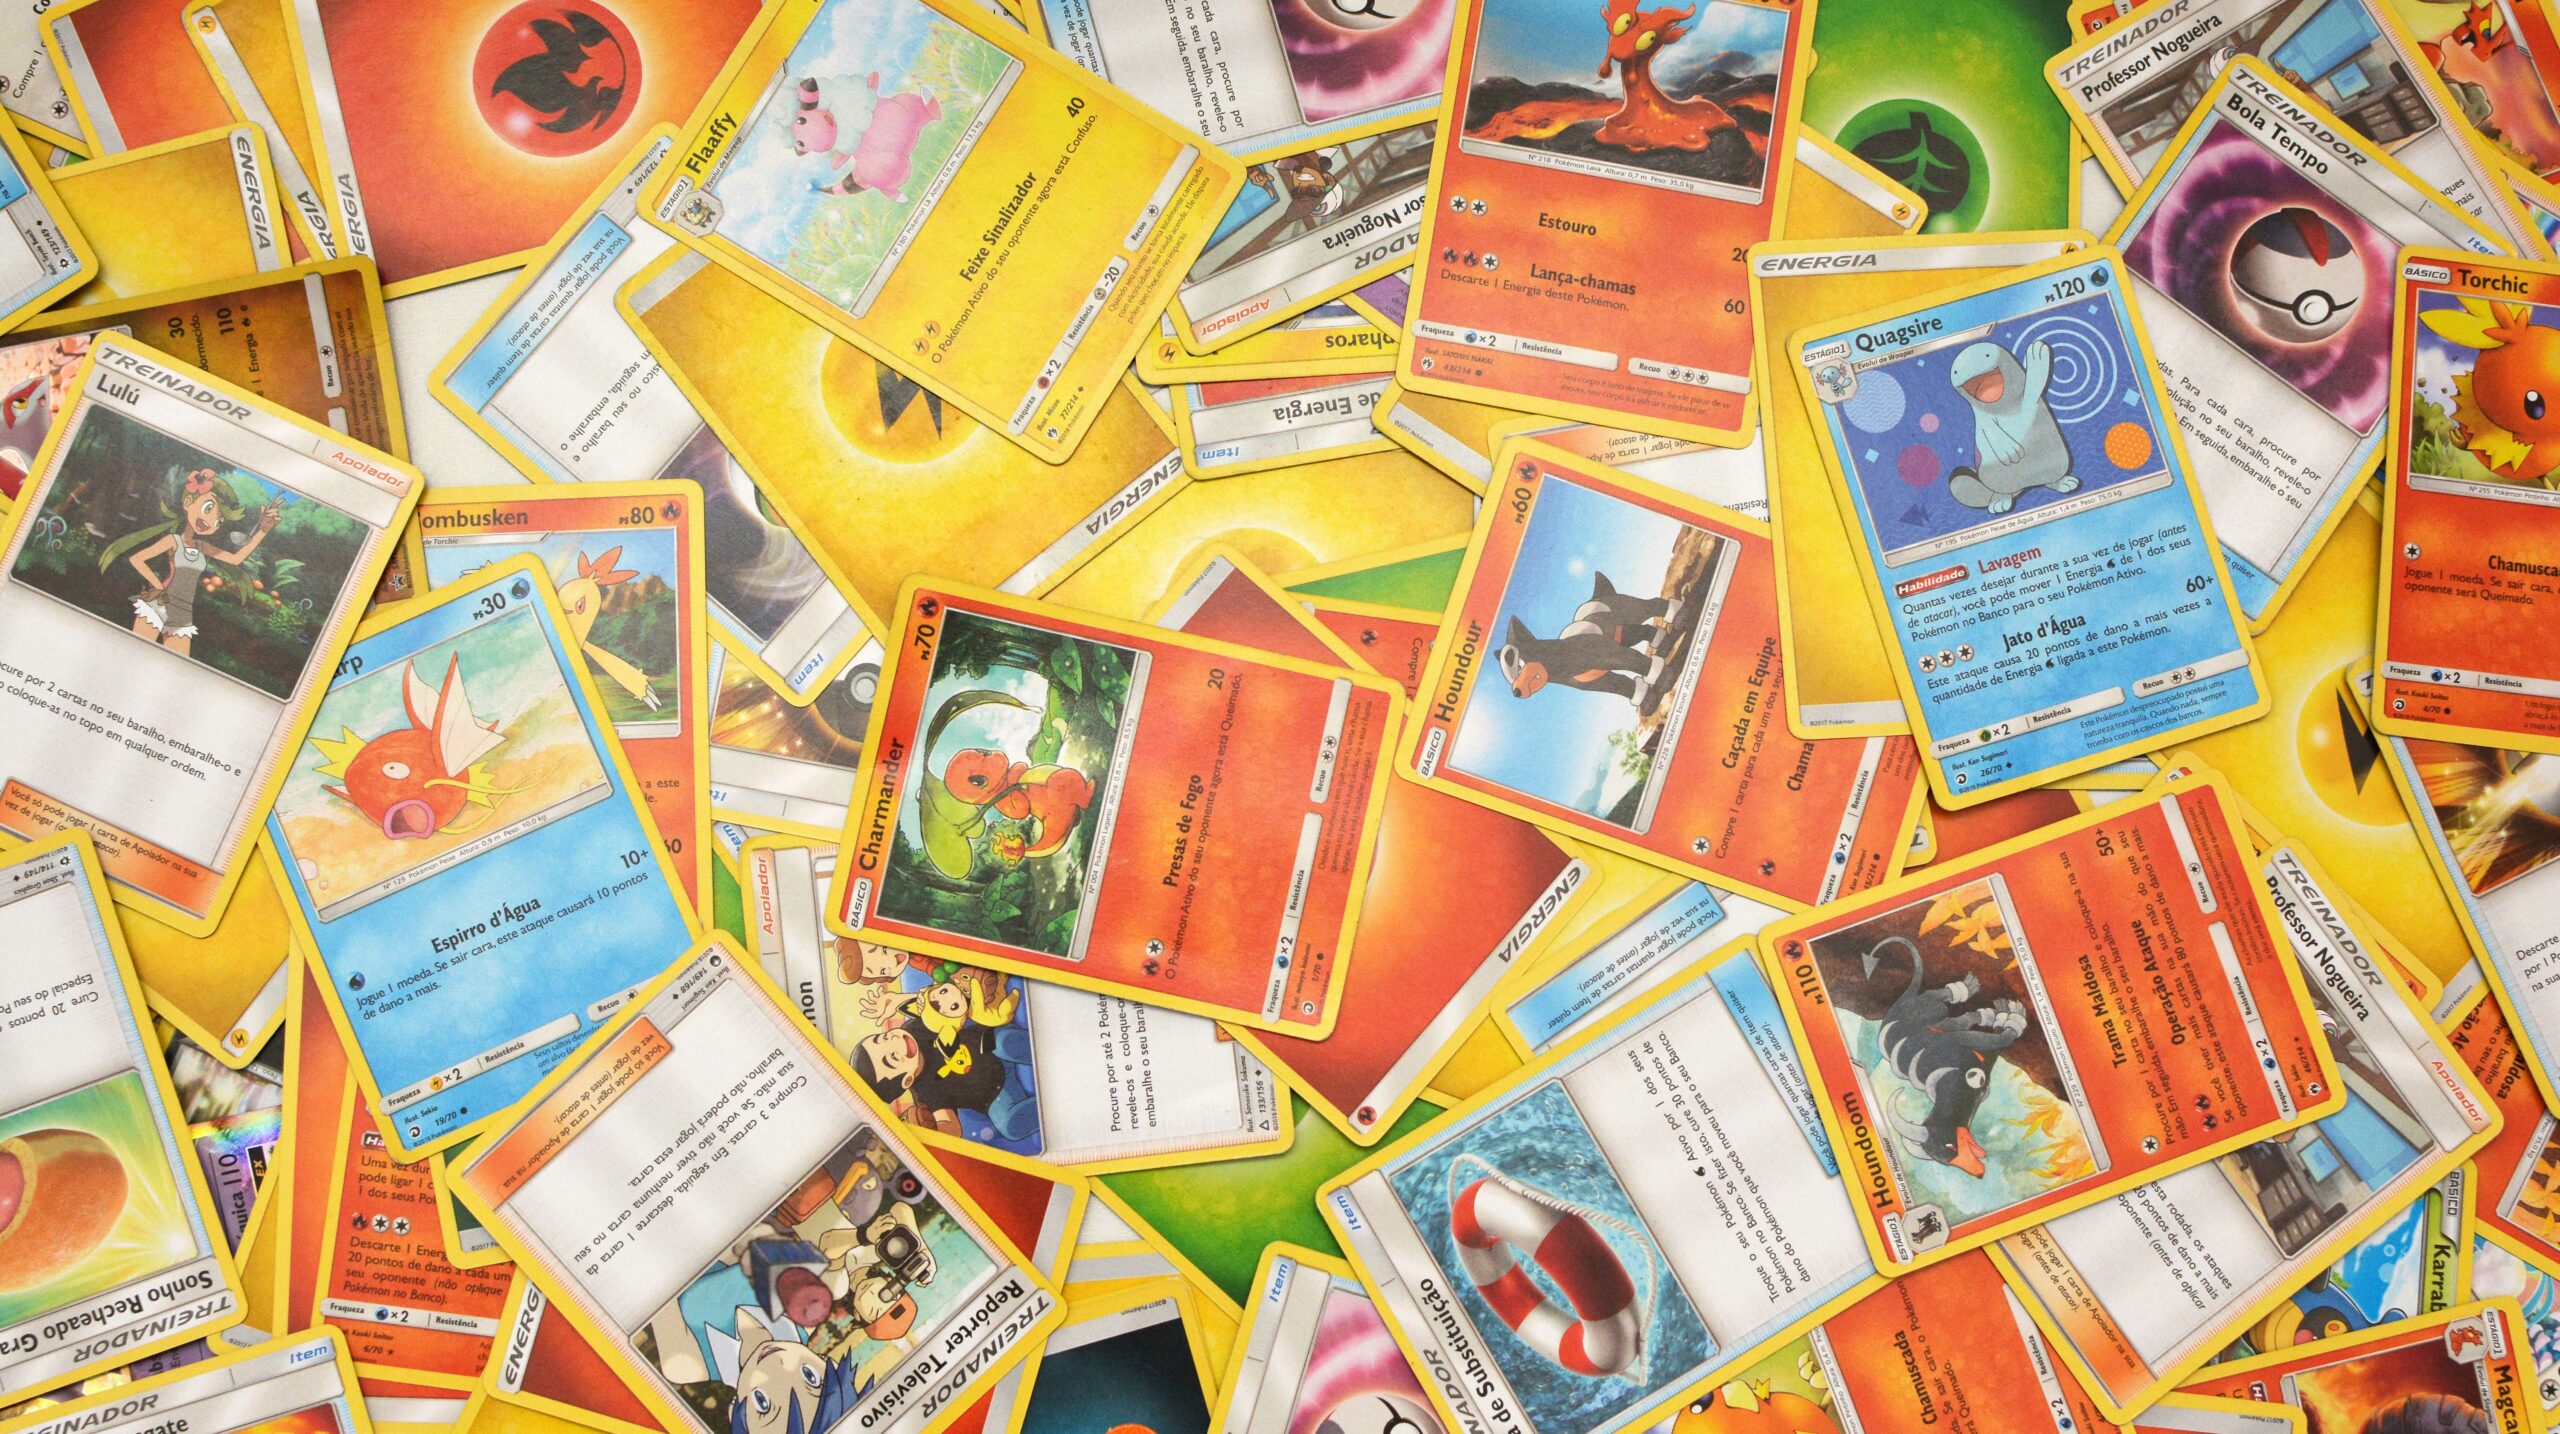 Four Torontonians charged with stealing $7,000 Charizard card